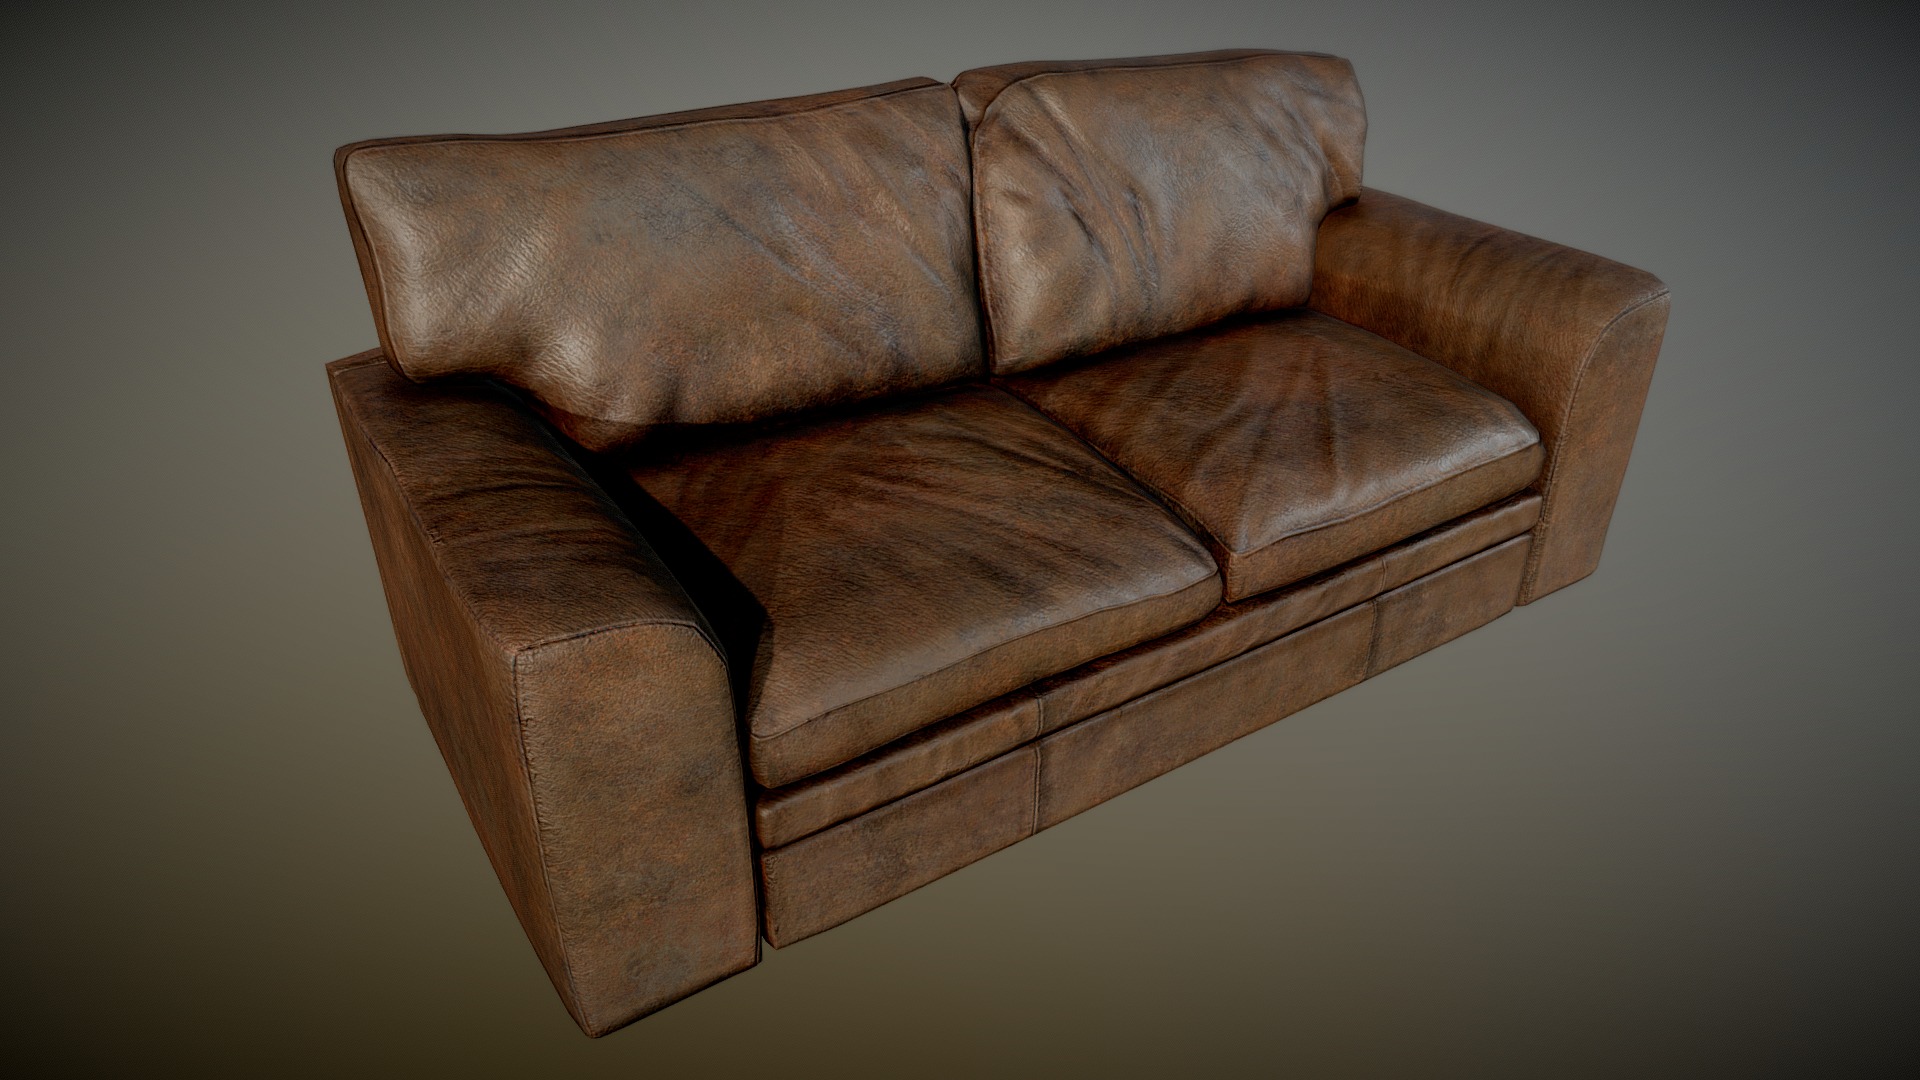 3D model Old Dirty Leather Couch Brown – PBR - This is a 3D model of the Old Dirty Leather Couch Brown - PBR. The 3D model is about a brown leather couch.